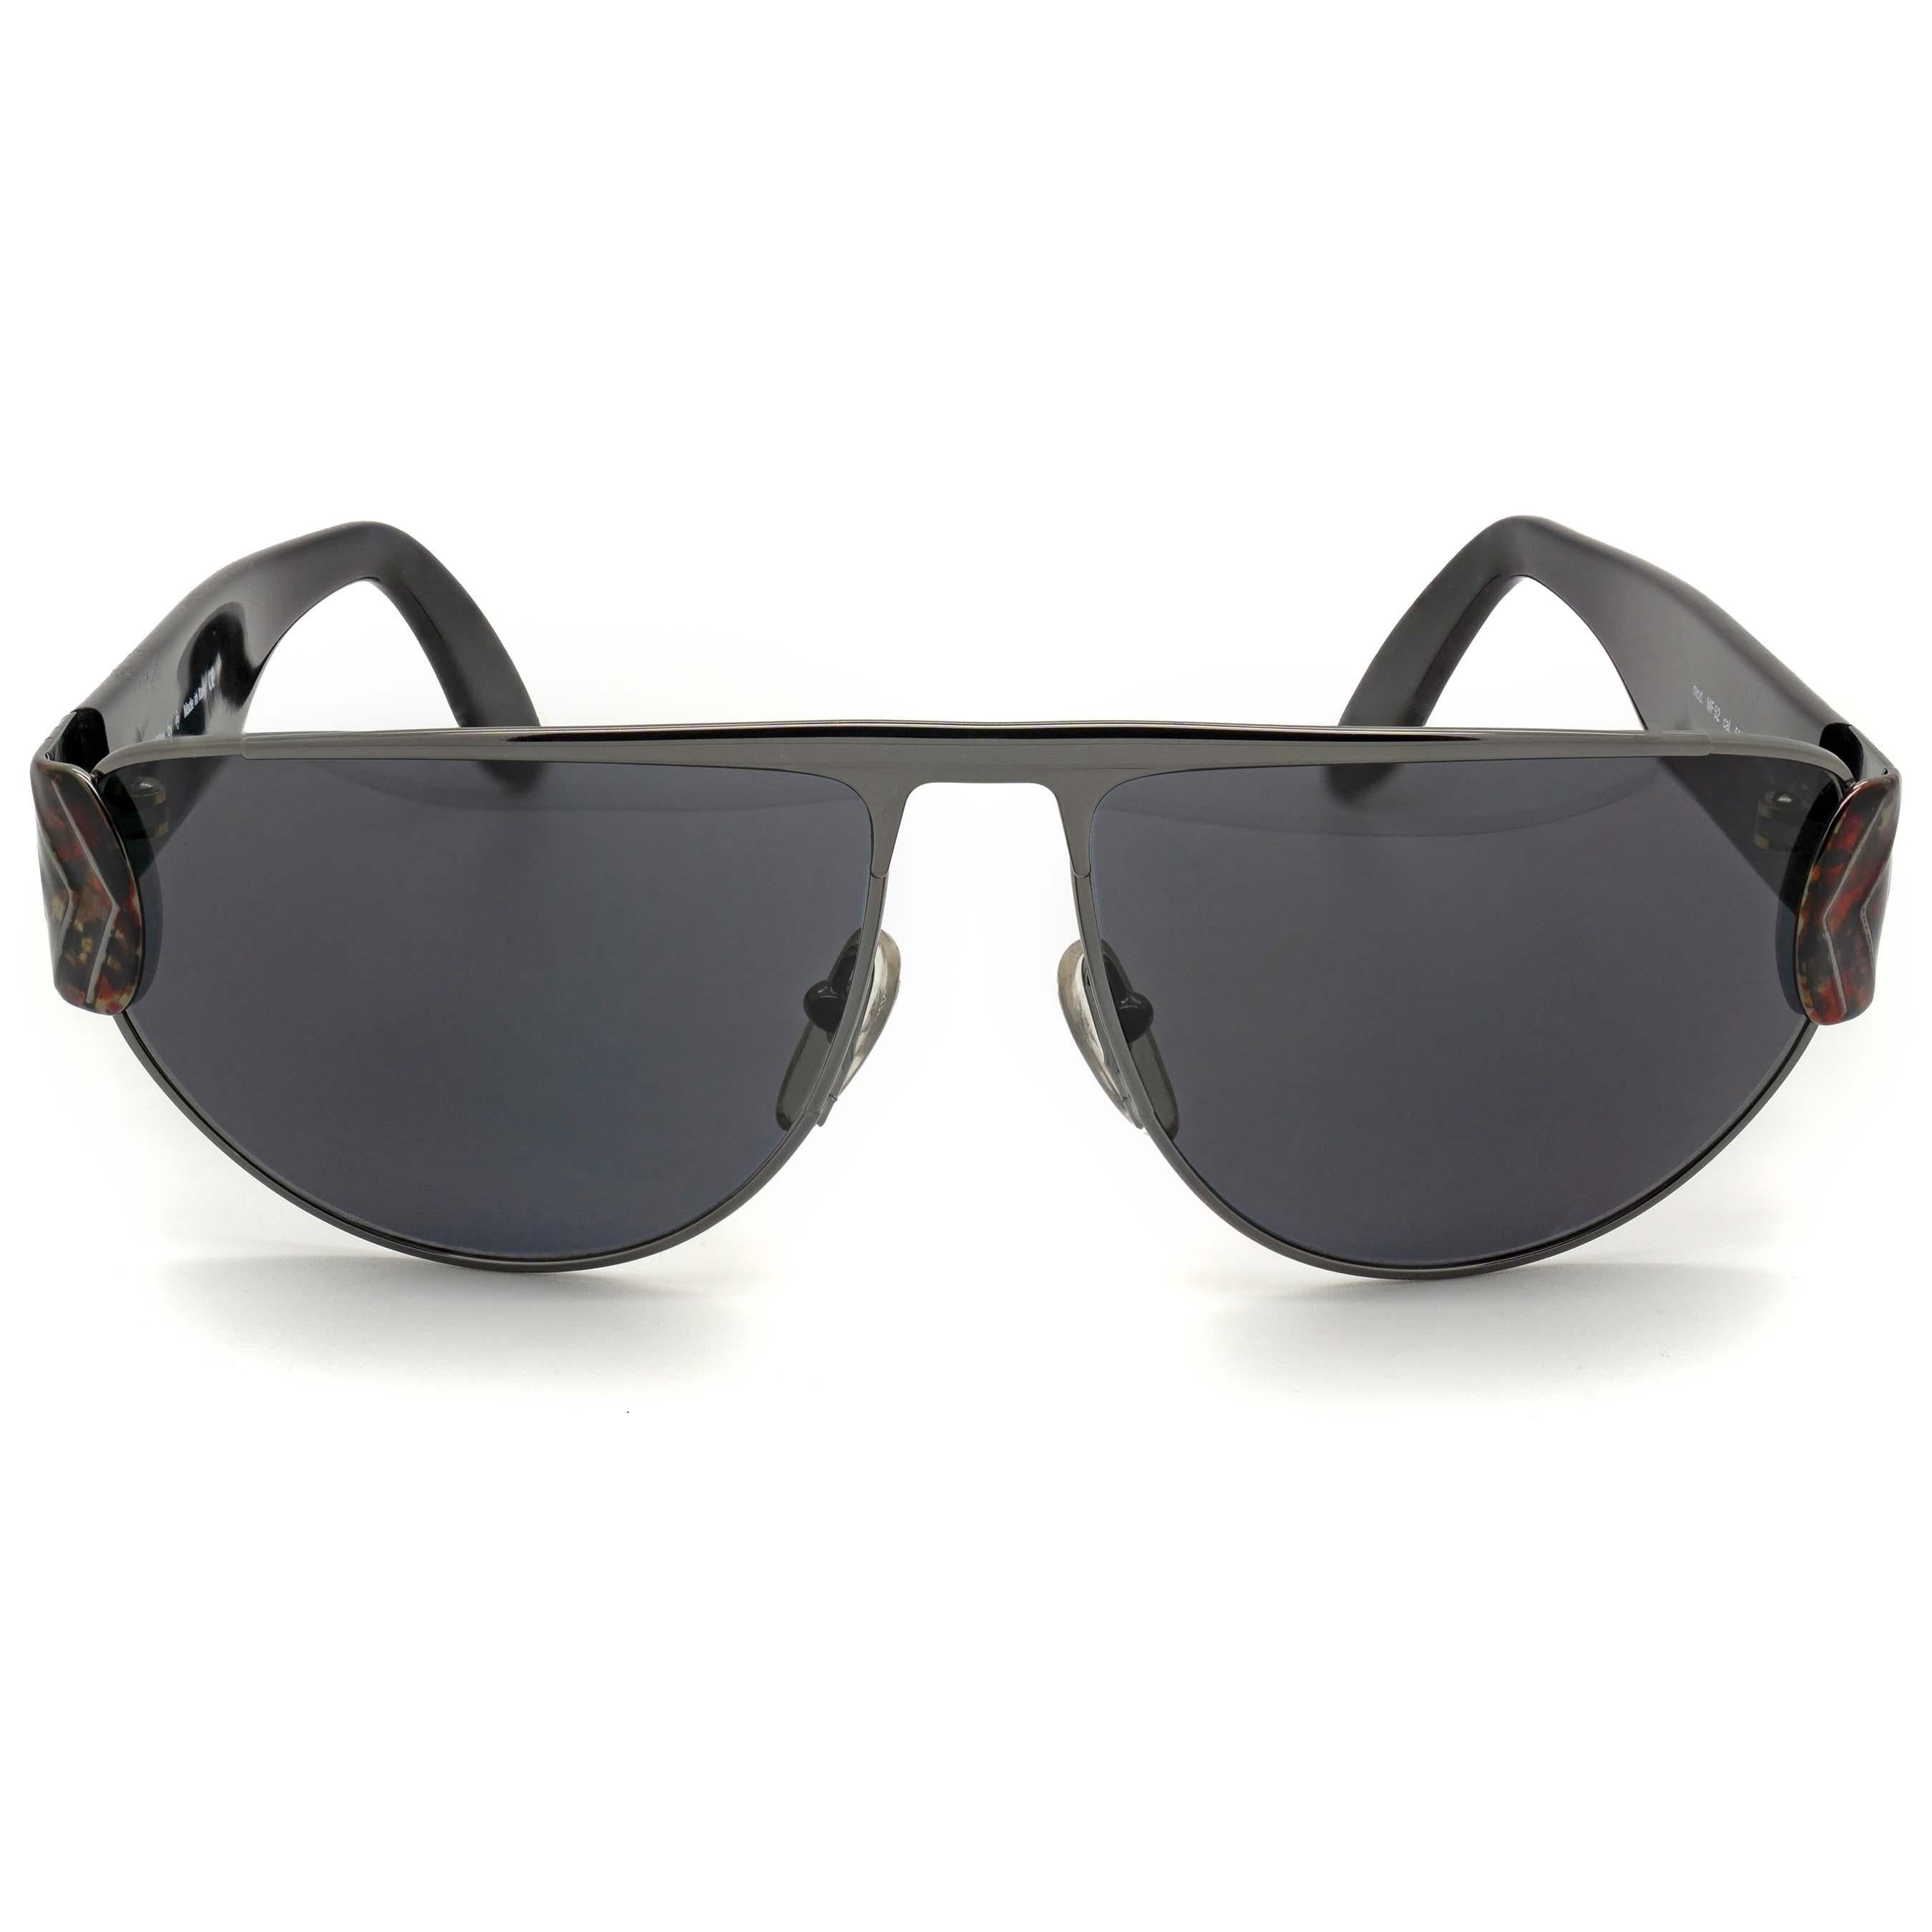 Black Vintage sunglasses by Egon Von Furstenberg, made in Italy in the 1980s For Sale